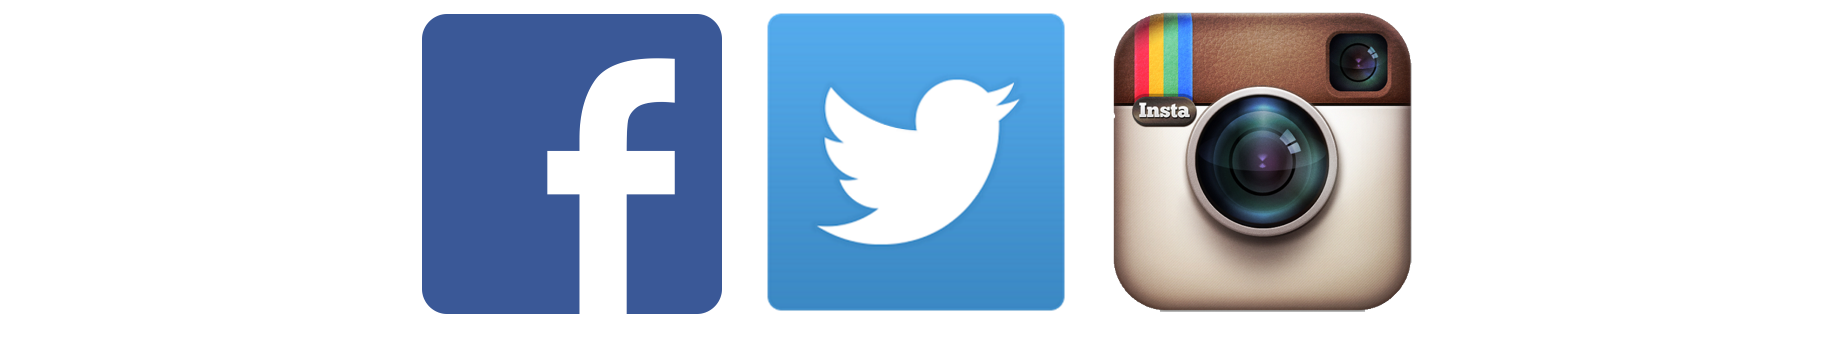 Twitter Facebook Instagram Icon Free Icons Library